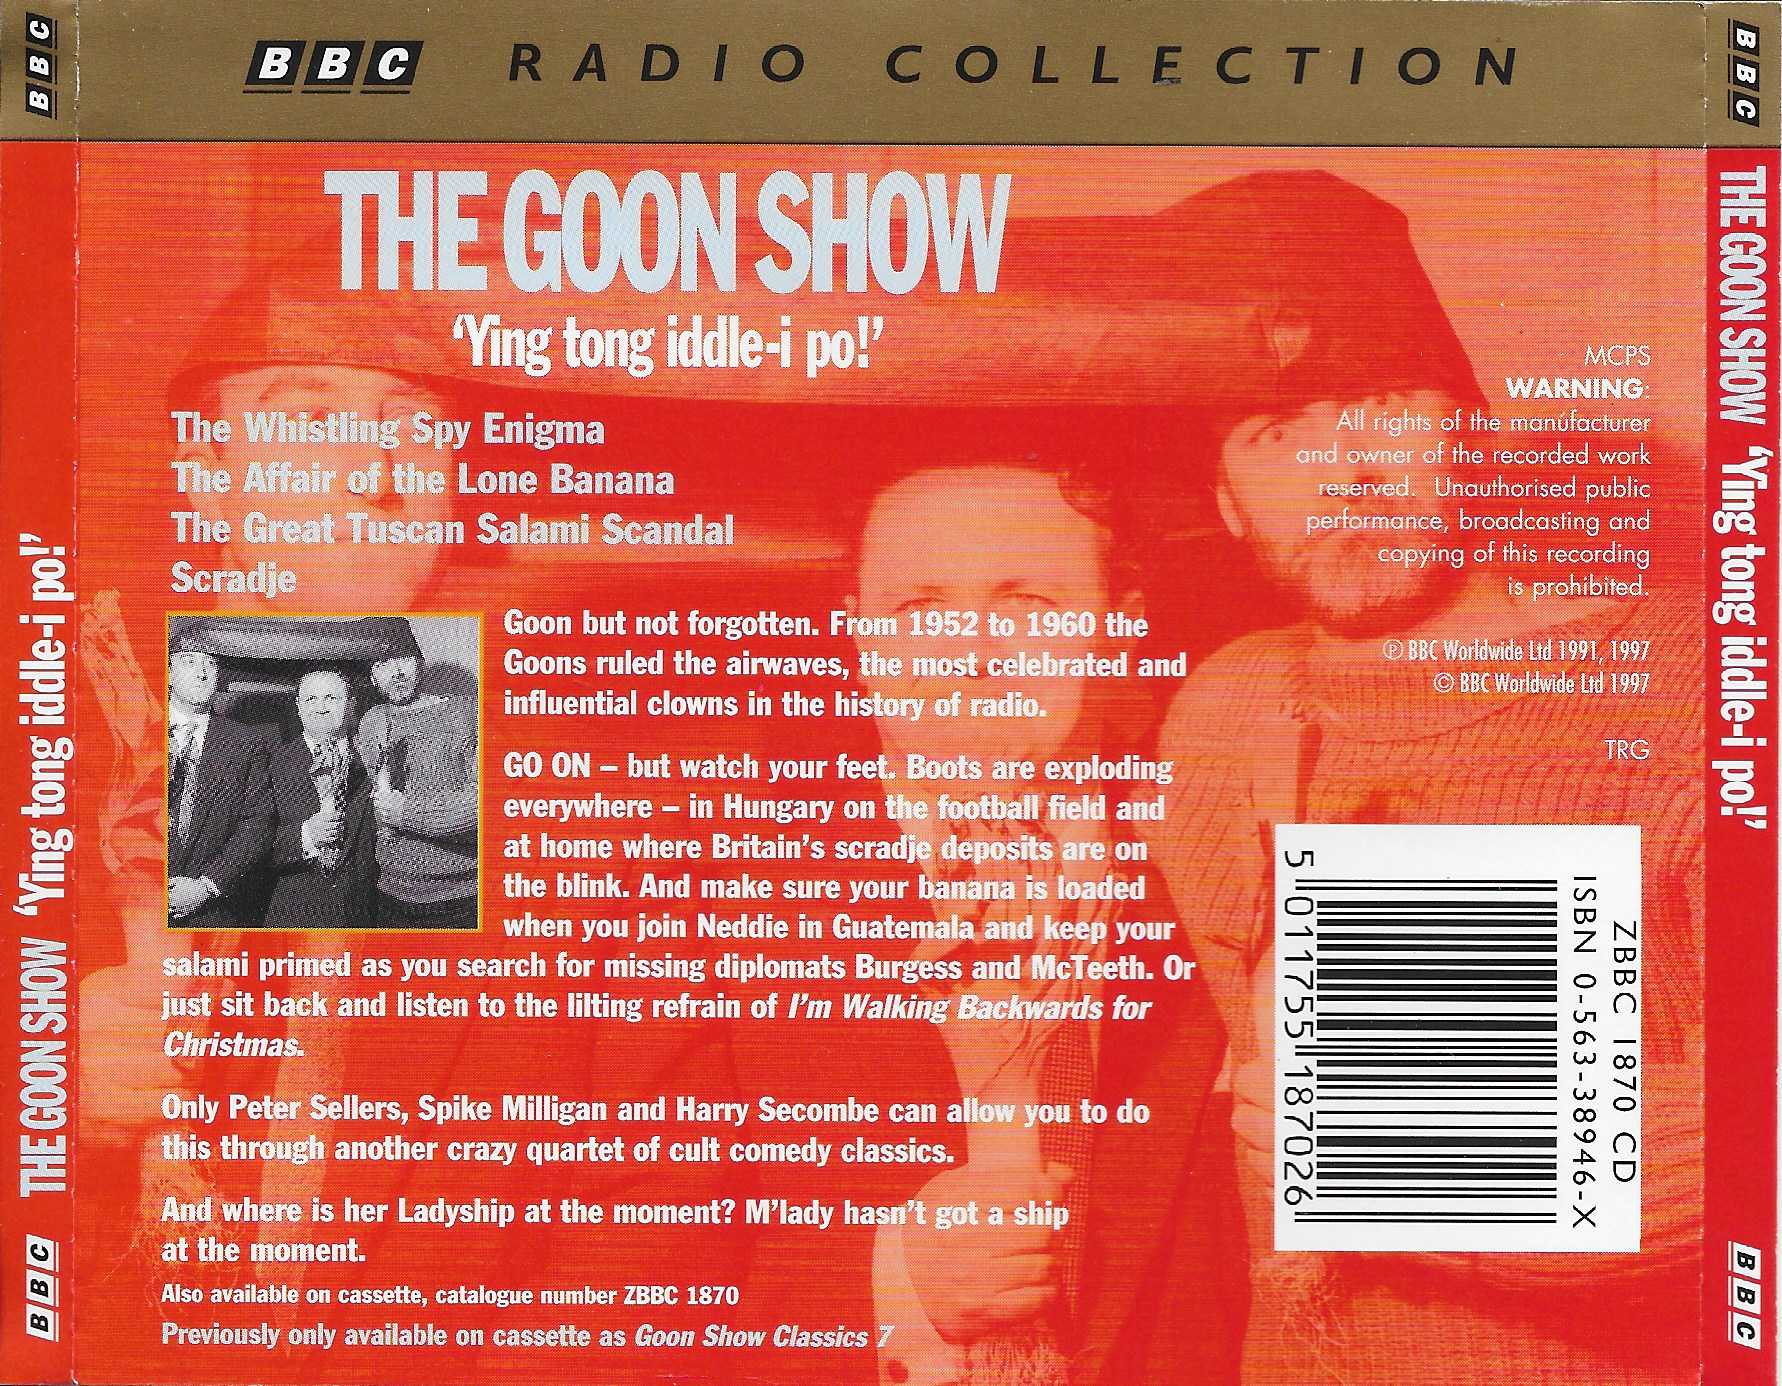 Picture of ZBBC 1870 CD The Goon show 7 - Ying tong iddle-i po! by artist Spike Milligan from the BBC records and Tapes library